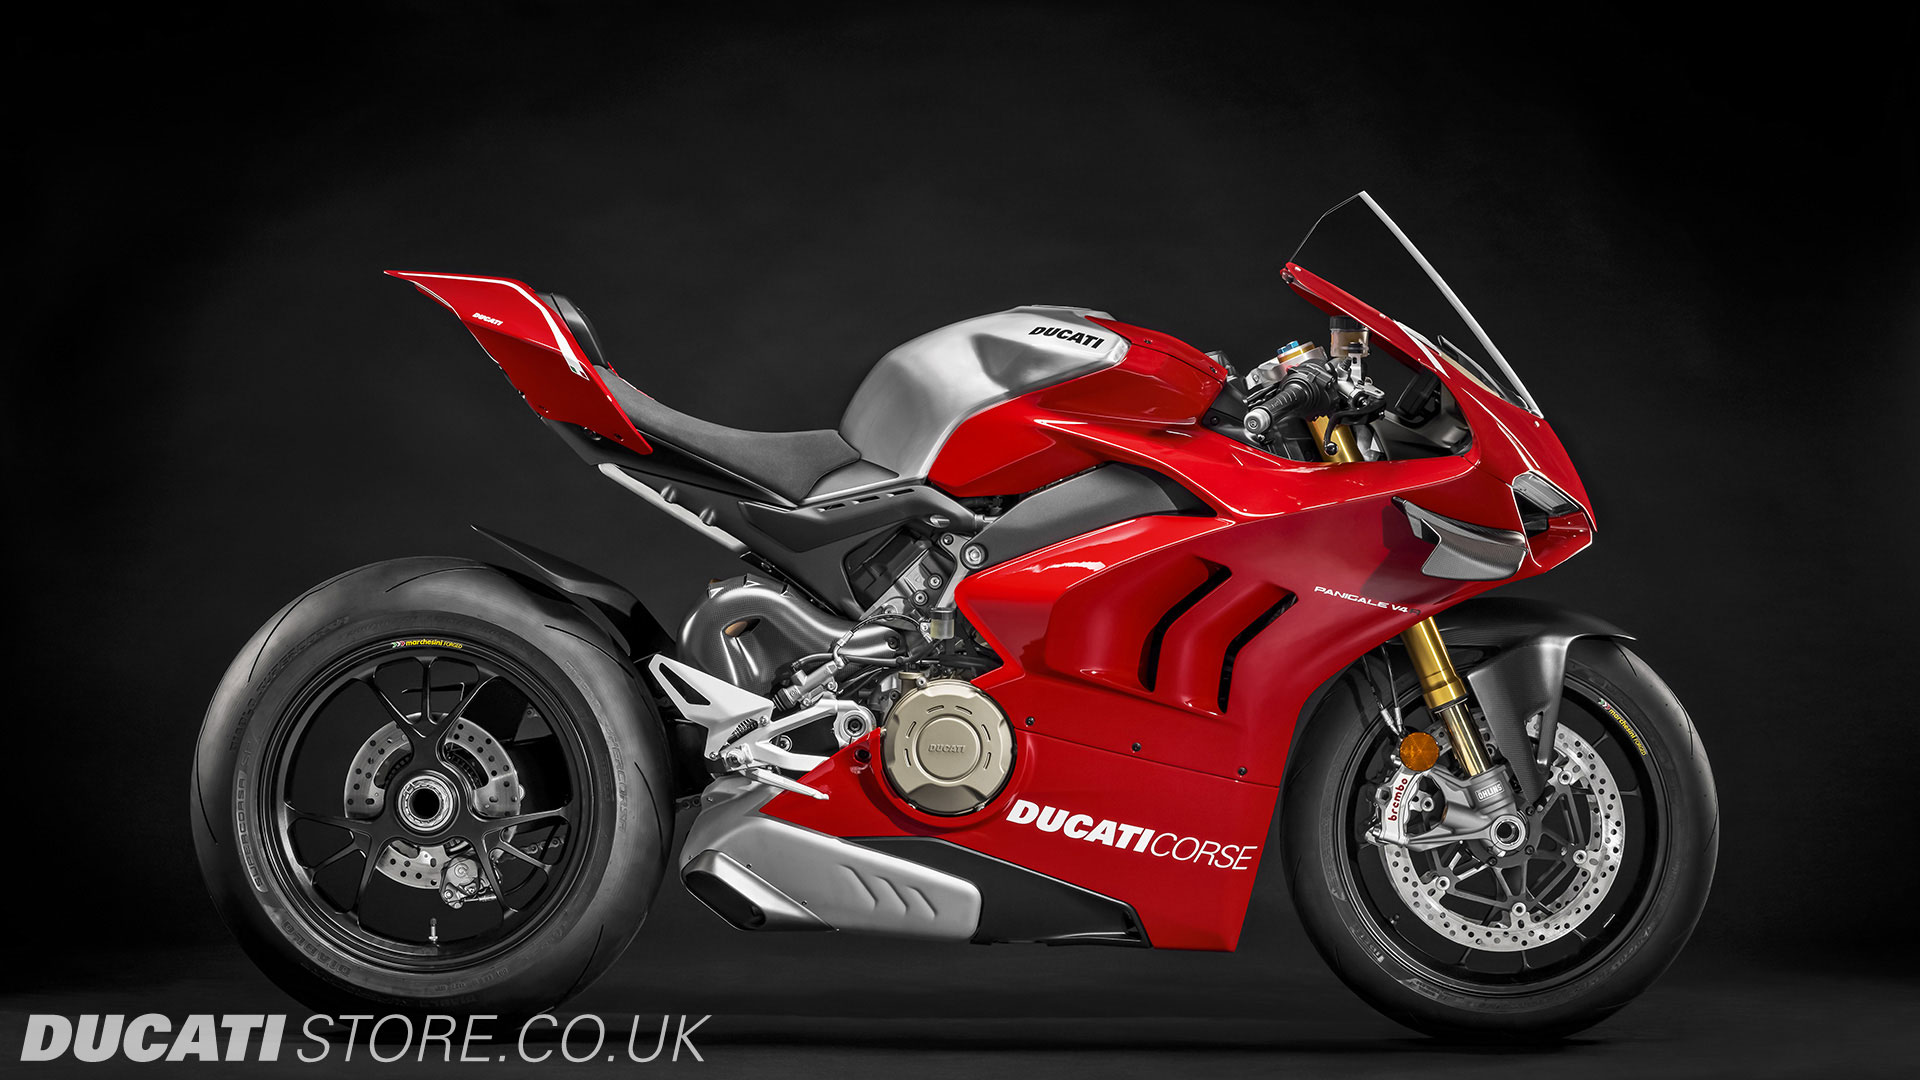 Ducati Panigale V4r For Sale Uk Manchester